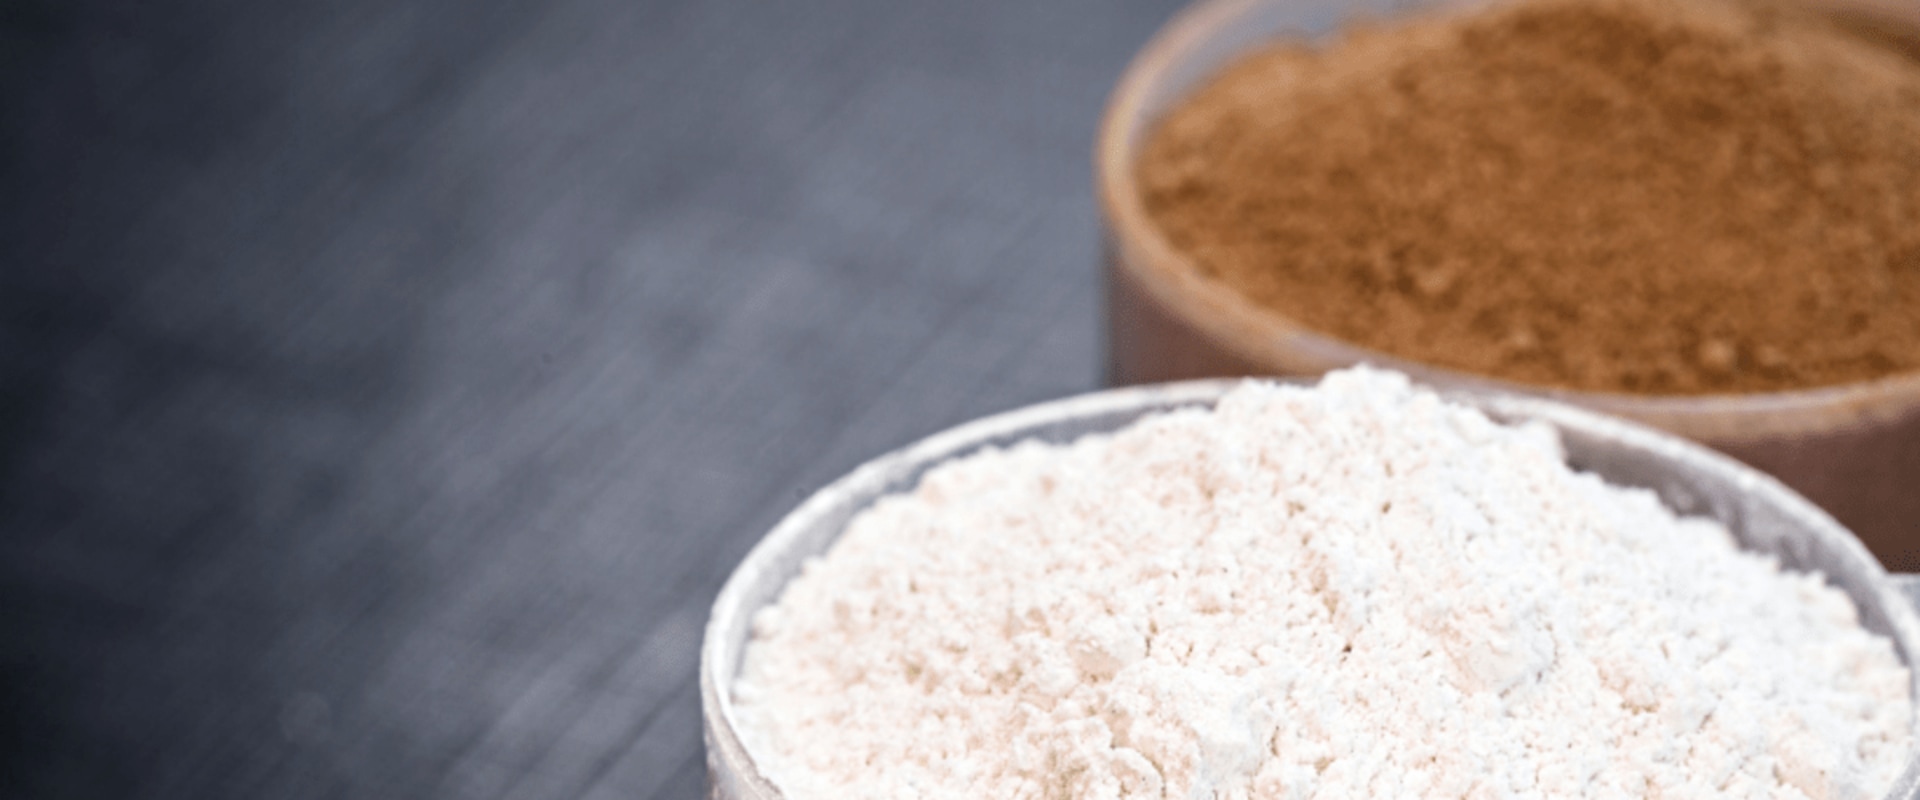 Do Vegetarians Need to Supplement with Protein Powder? - A Guide for Plant-Based Diets